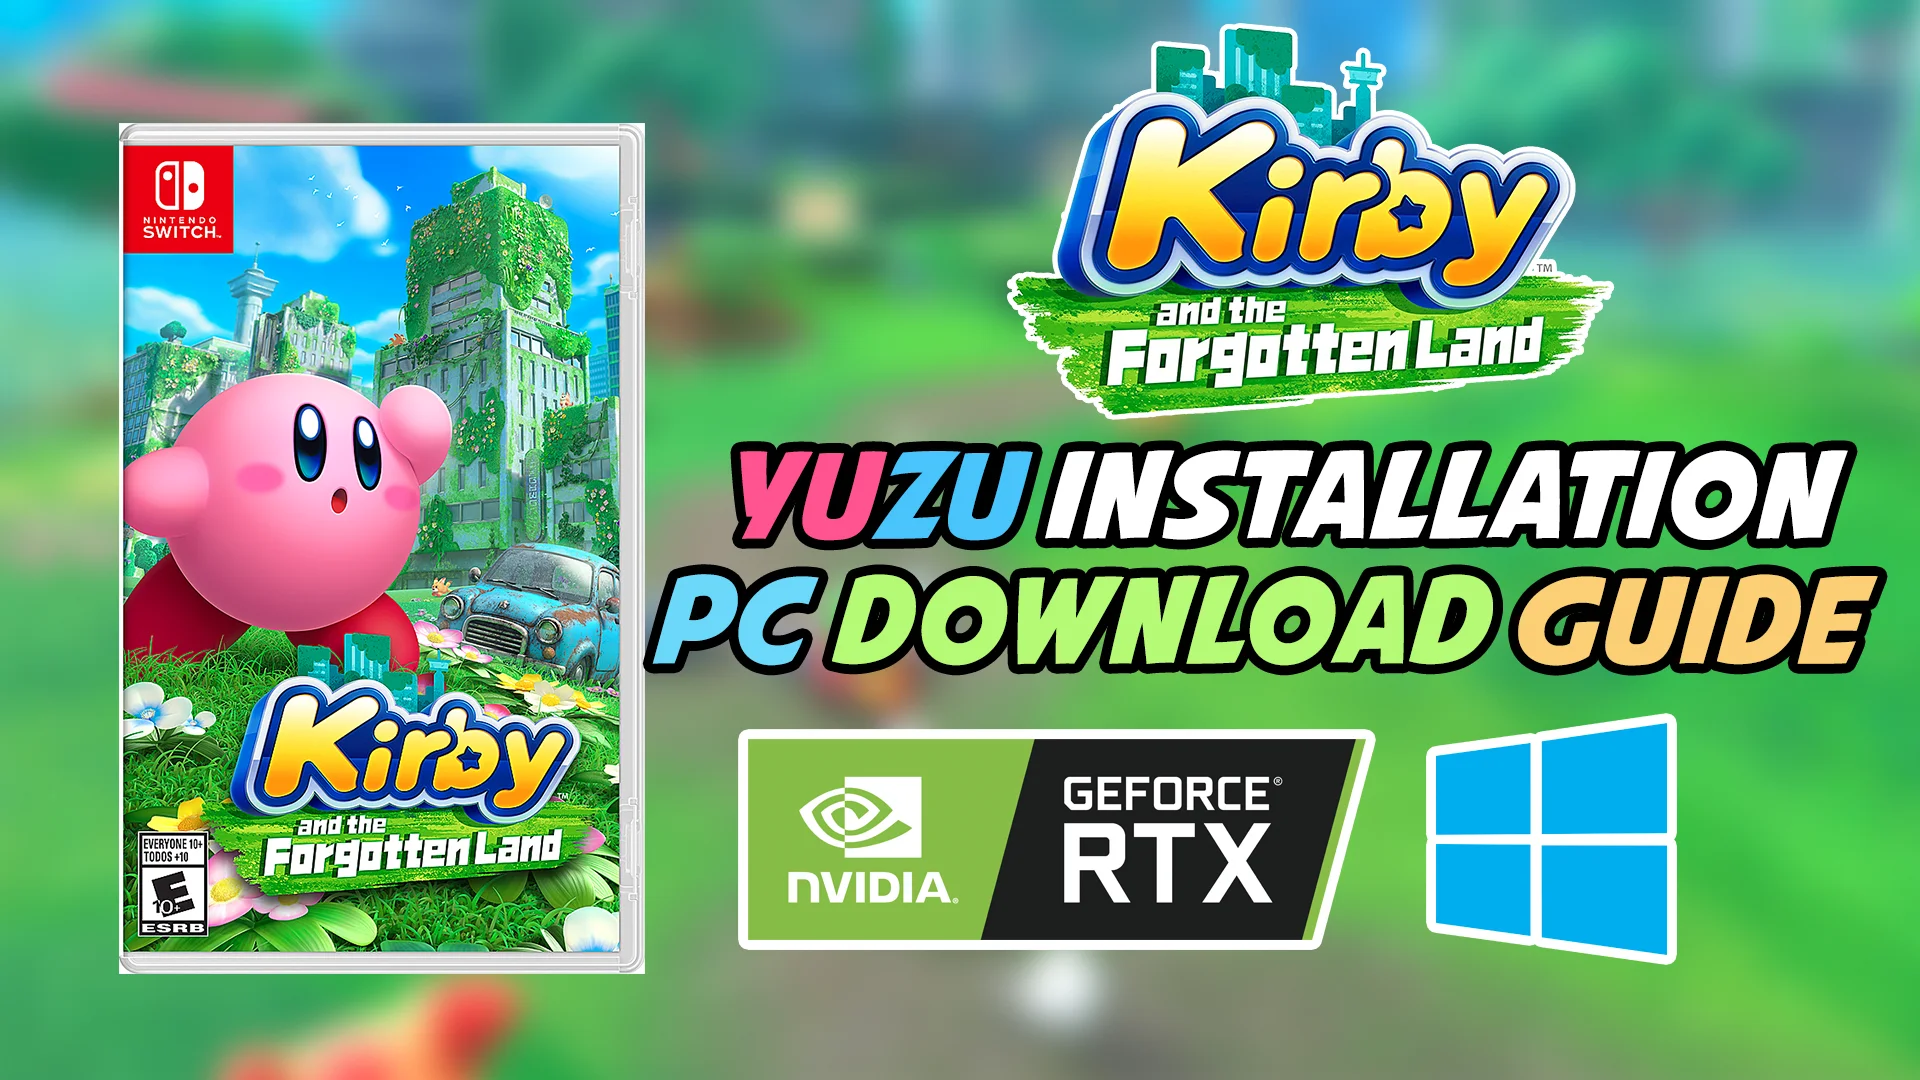 How to Play Kirby and the Forgotten Land on PC Using Yuzu Emulator on Vimeo